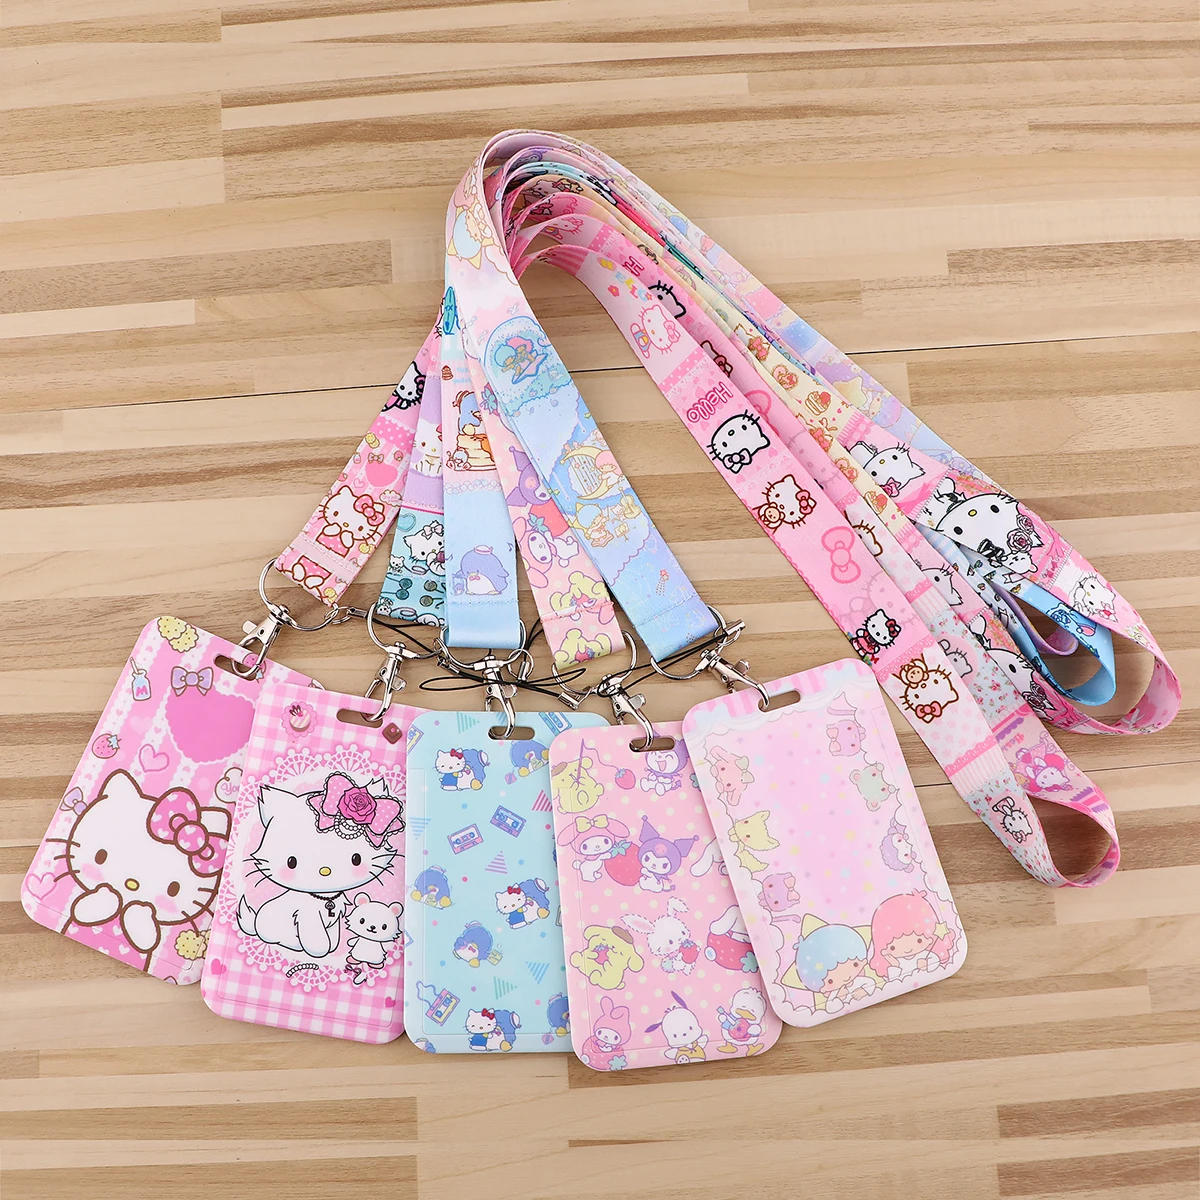 Rabbit Keychain Kawaii Cat Cartoon Anime Lanyards for Key ID Card Gym Cell Phone Strap USB Badge Holder Accessories Gift piano music neck strap lanyards id badge card holder keychain mobile phone strap gift ribbon webbing necklace decorations gifts